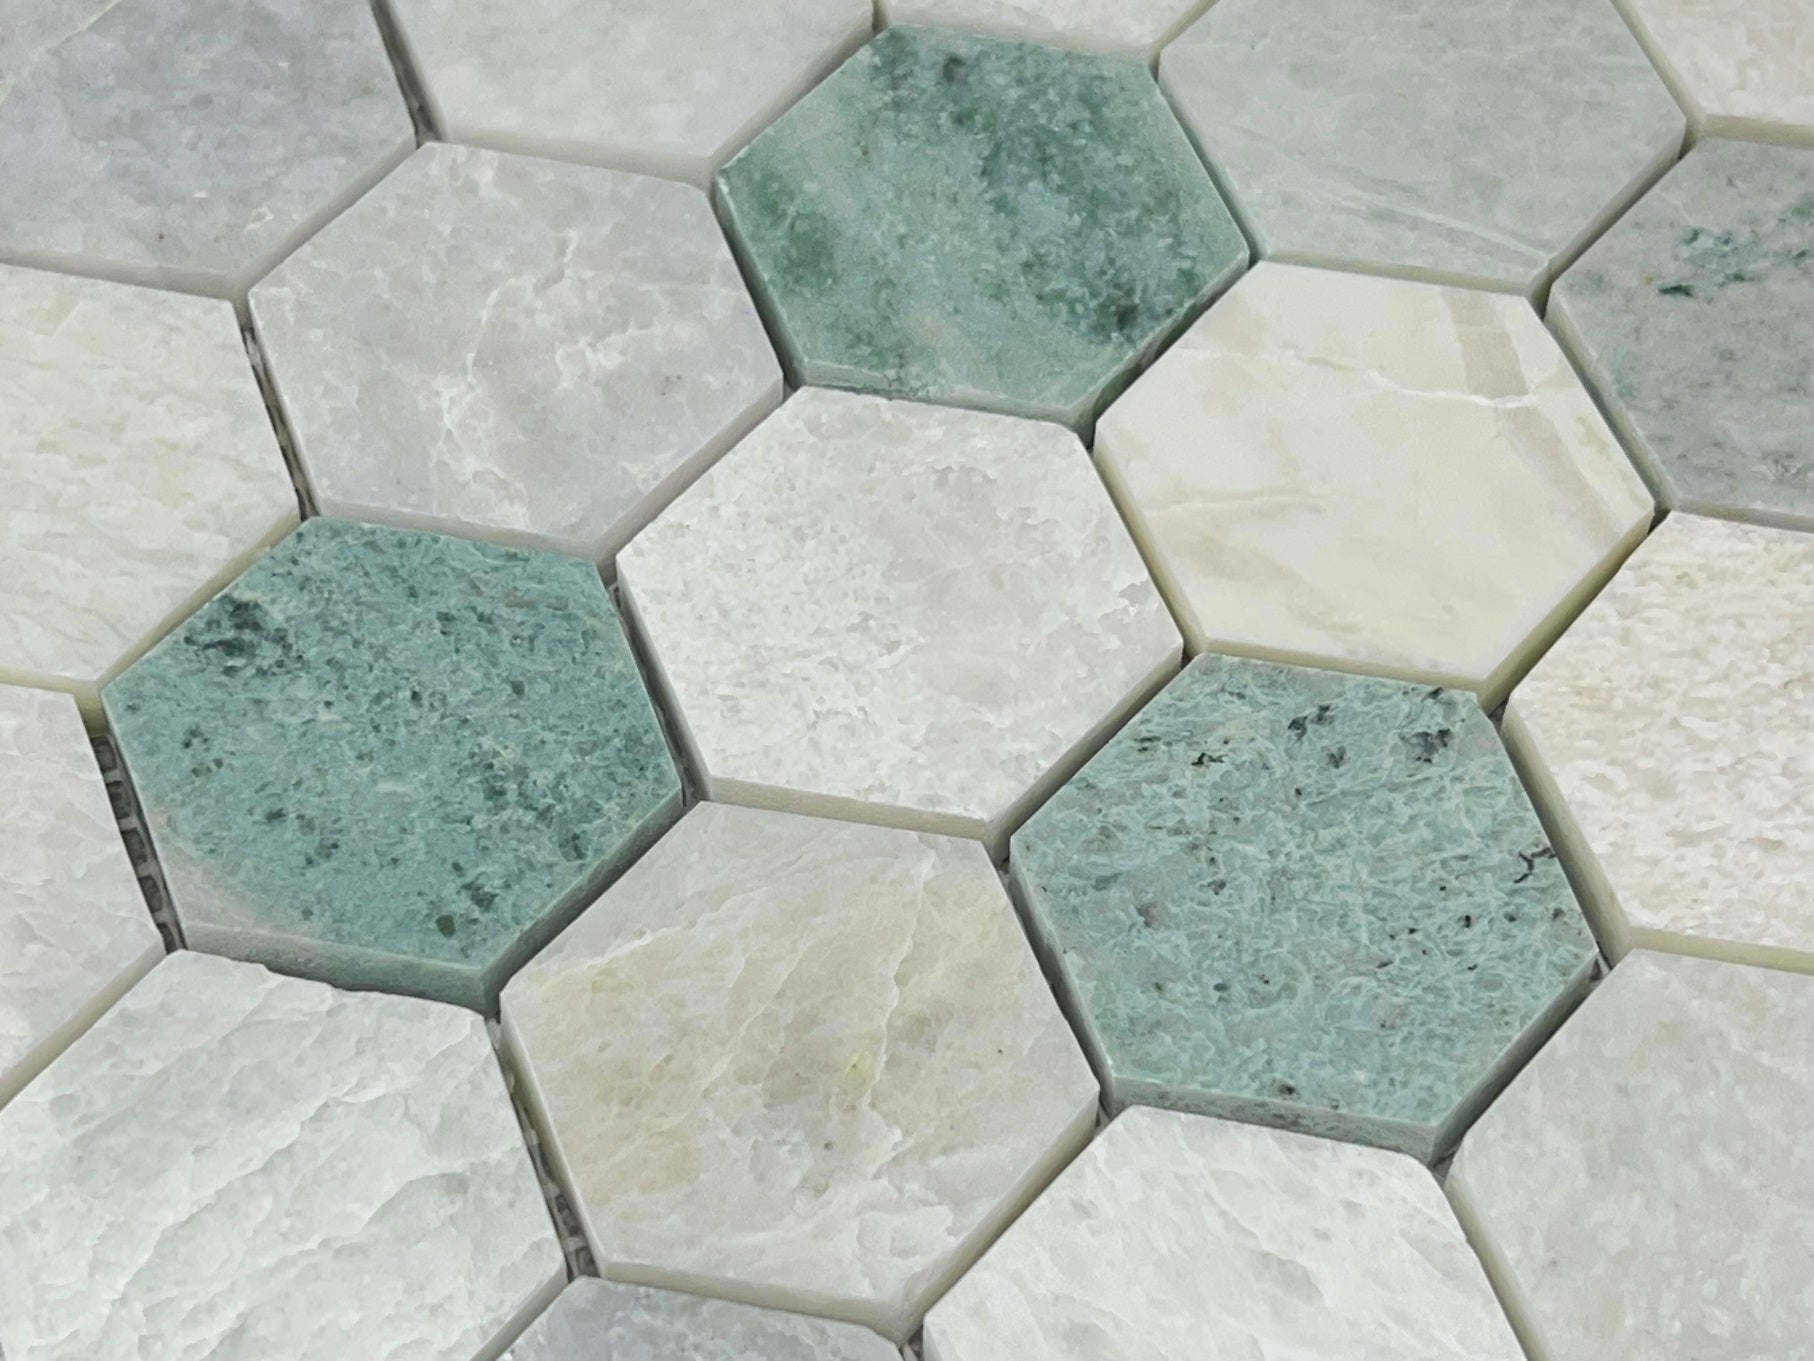 Ming Green 2 Inch Hexagon Polished Marble Mosaic Tile for Floor and Wall Tile, Shower Surrounds, Accent Walls, Kitchen Backsplashes, and Residential Uses